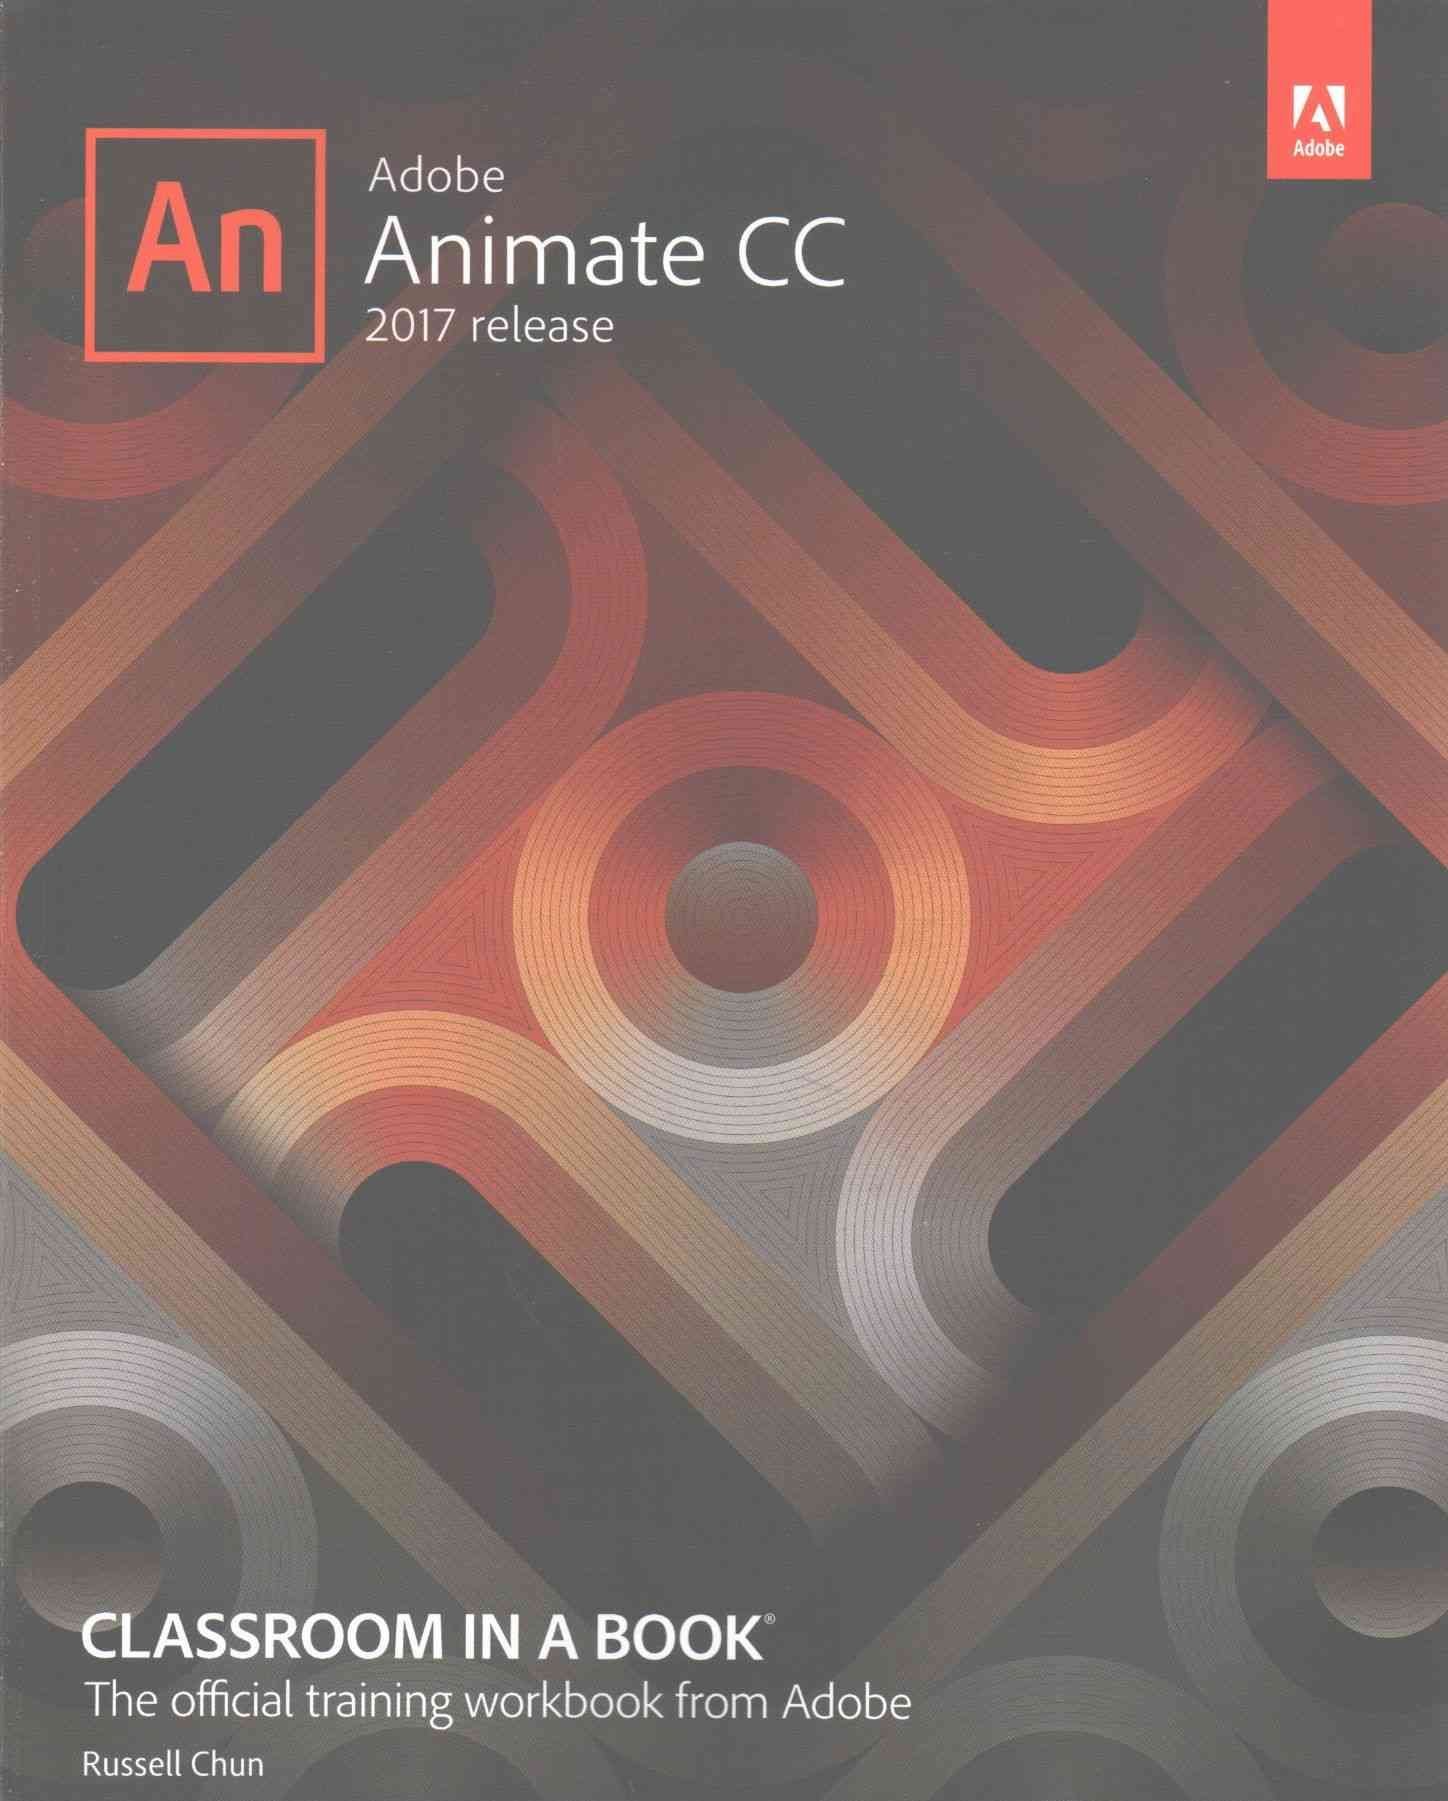 Buy Adobe Animate CC Classroom in a Book (2017 release) by Russell Chun  With Free Delivery 